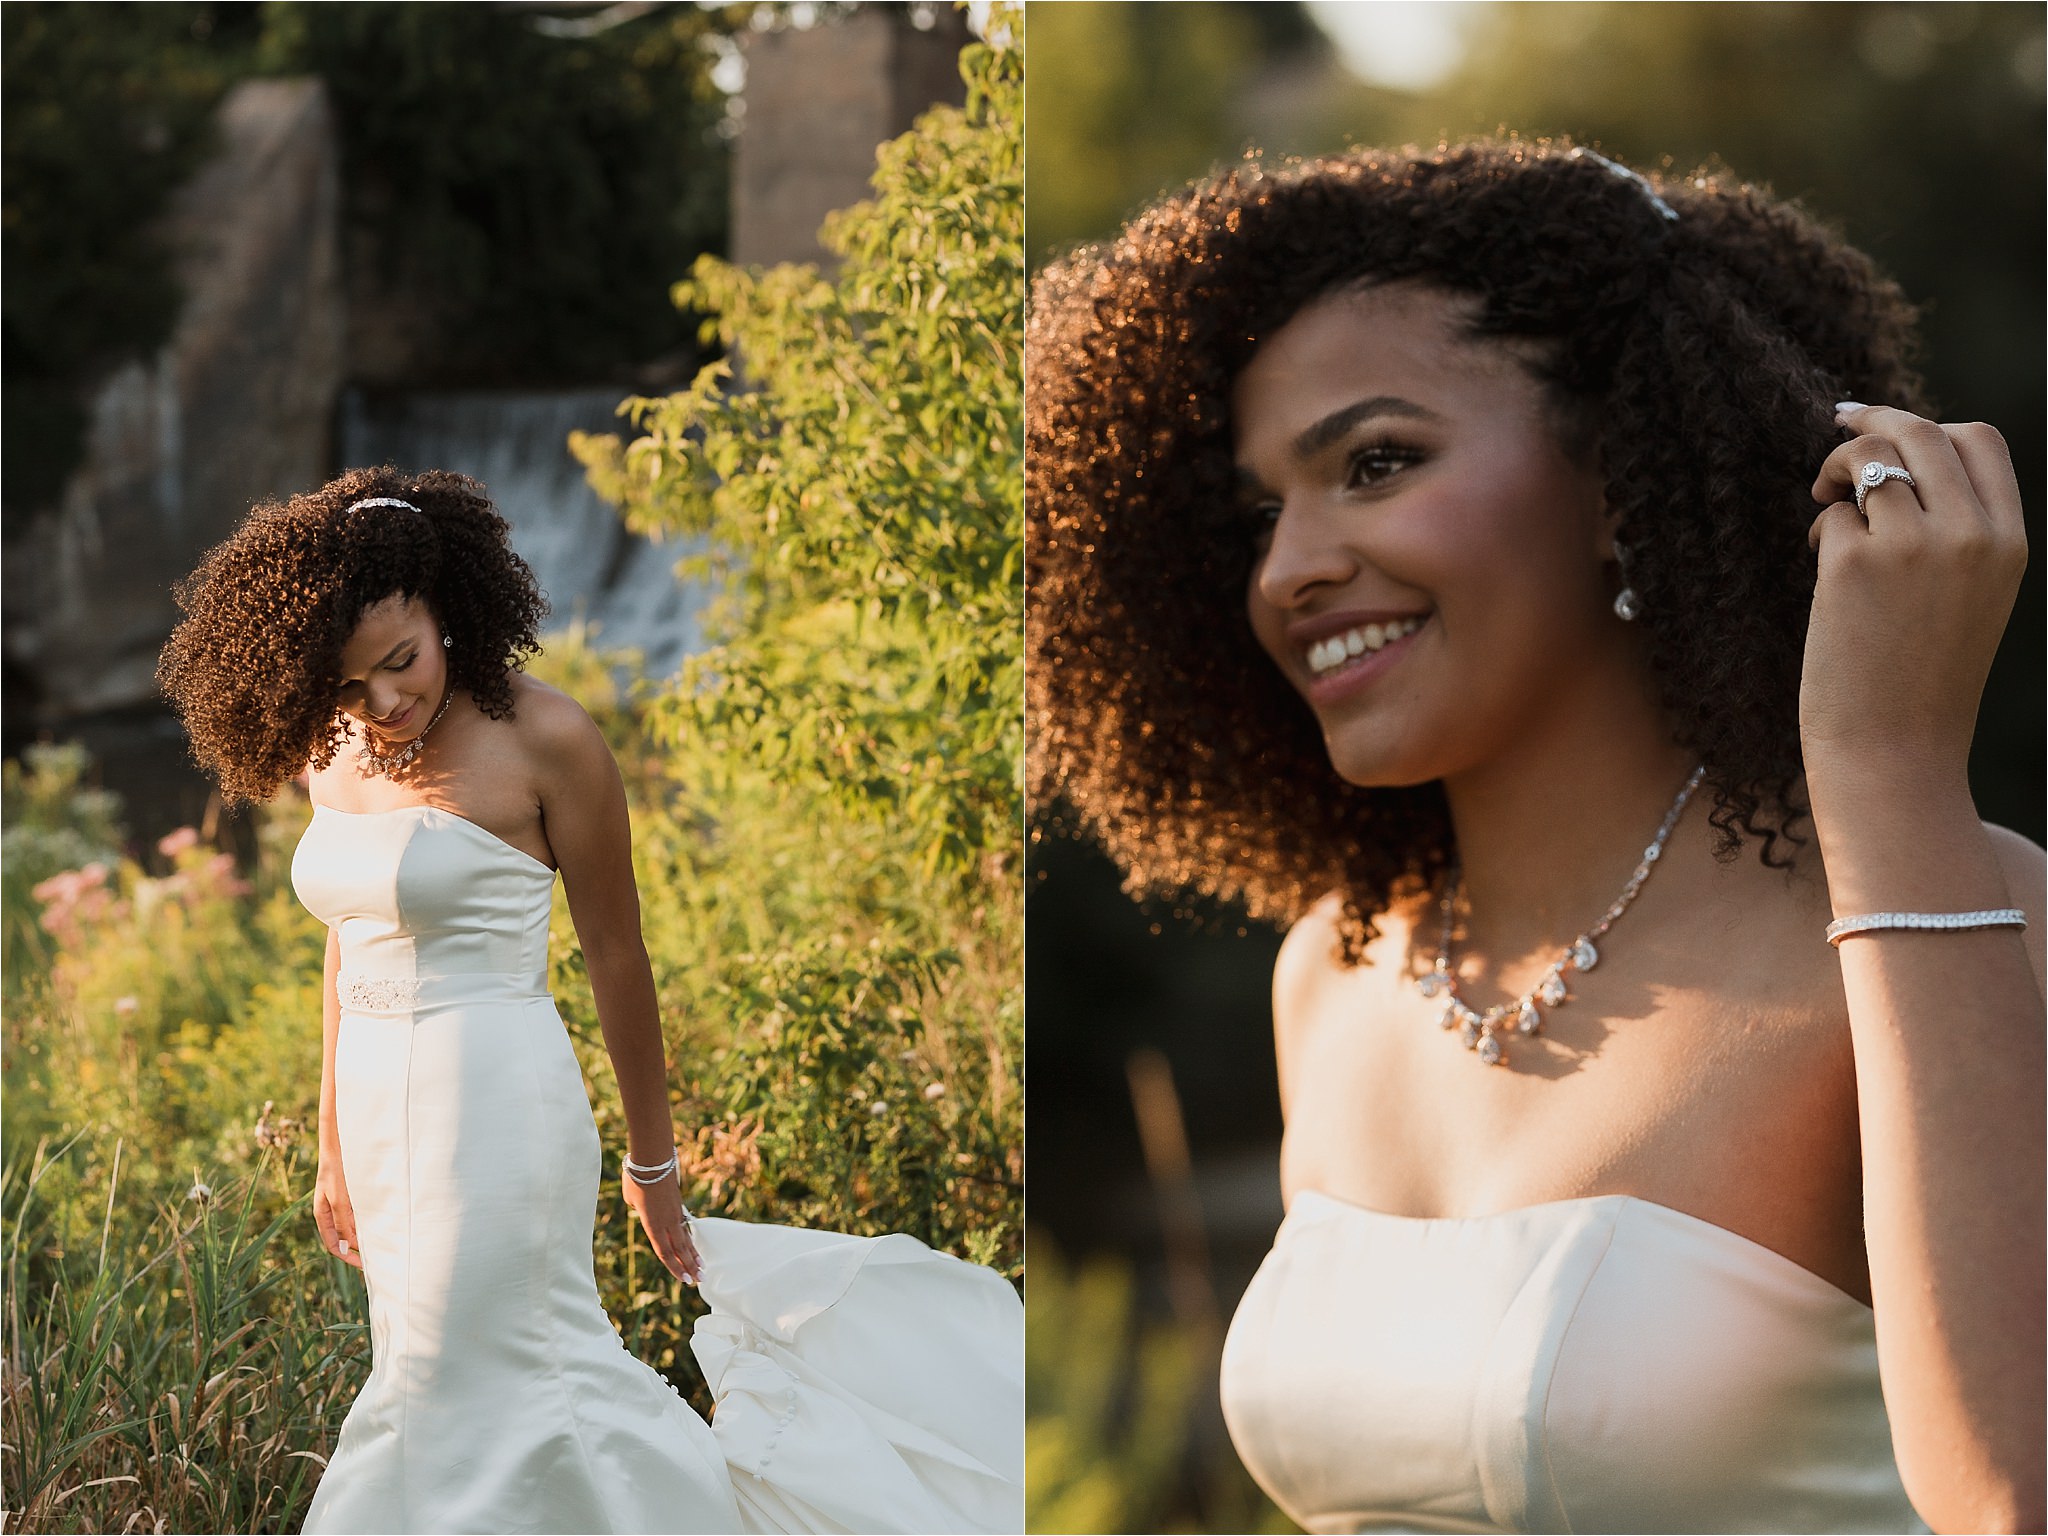 The Old Mill Wedding - Sonia V Photo - Wedding Engagement Elopement Photographer